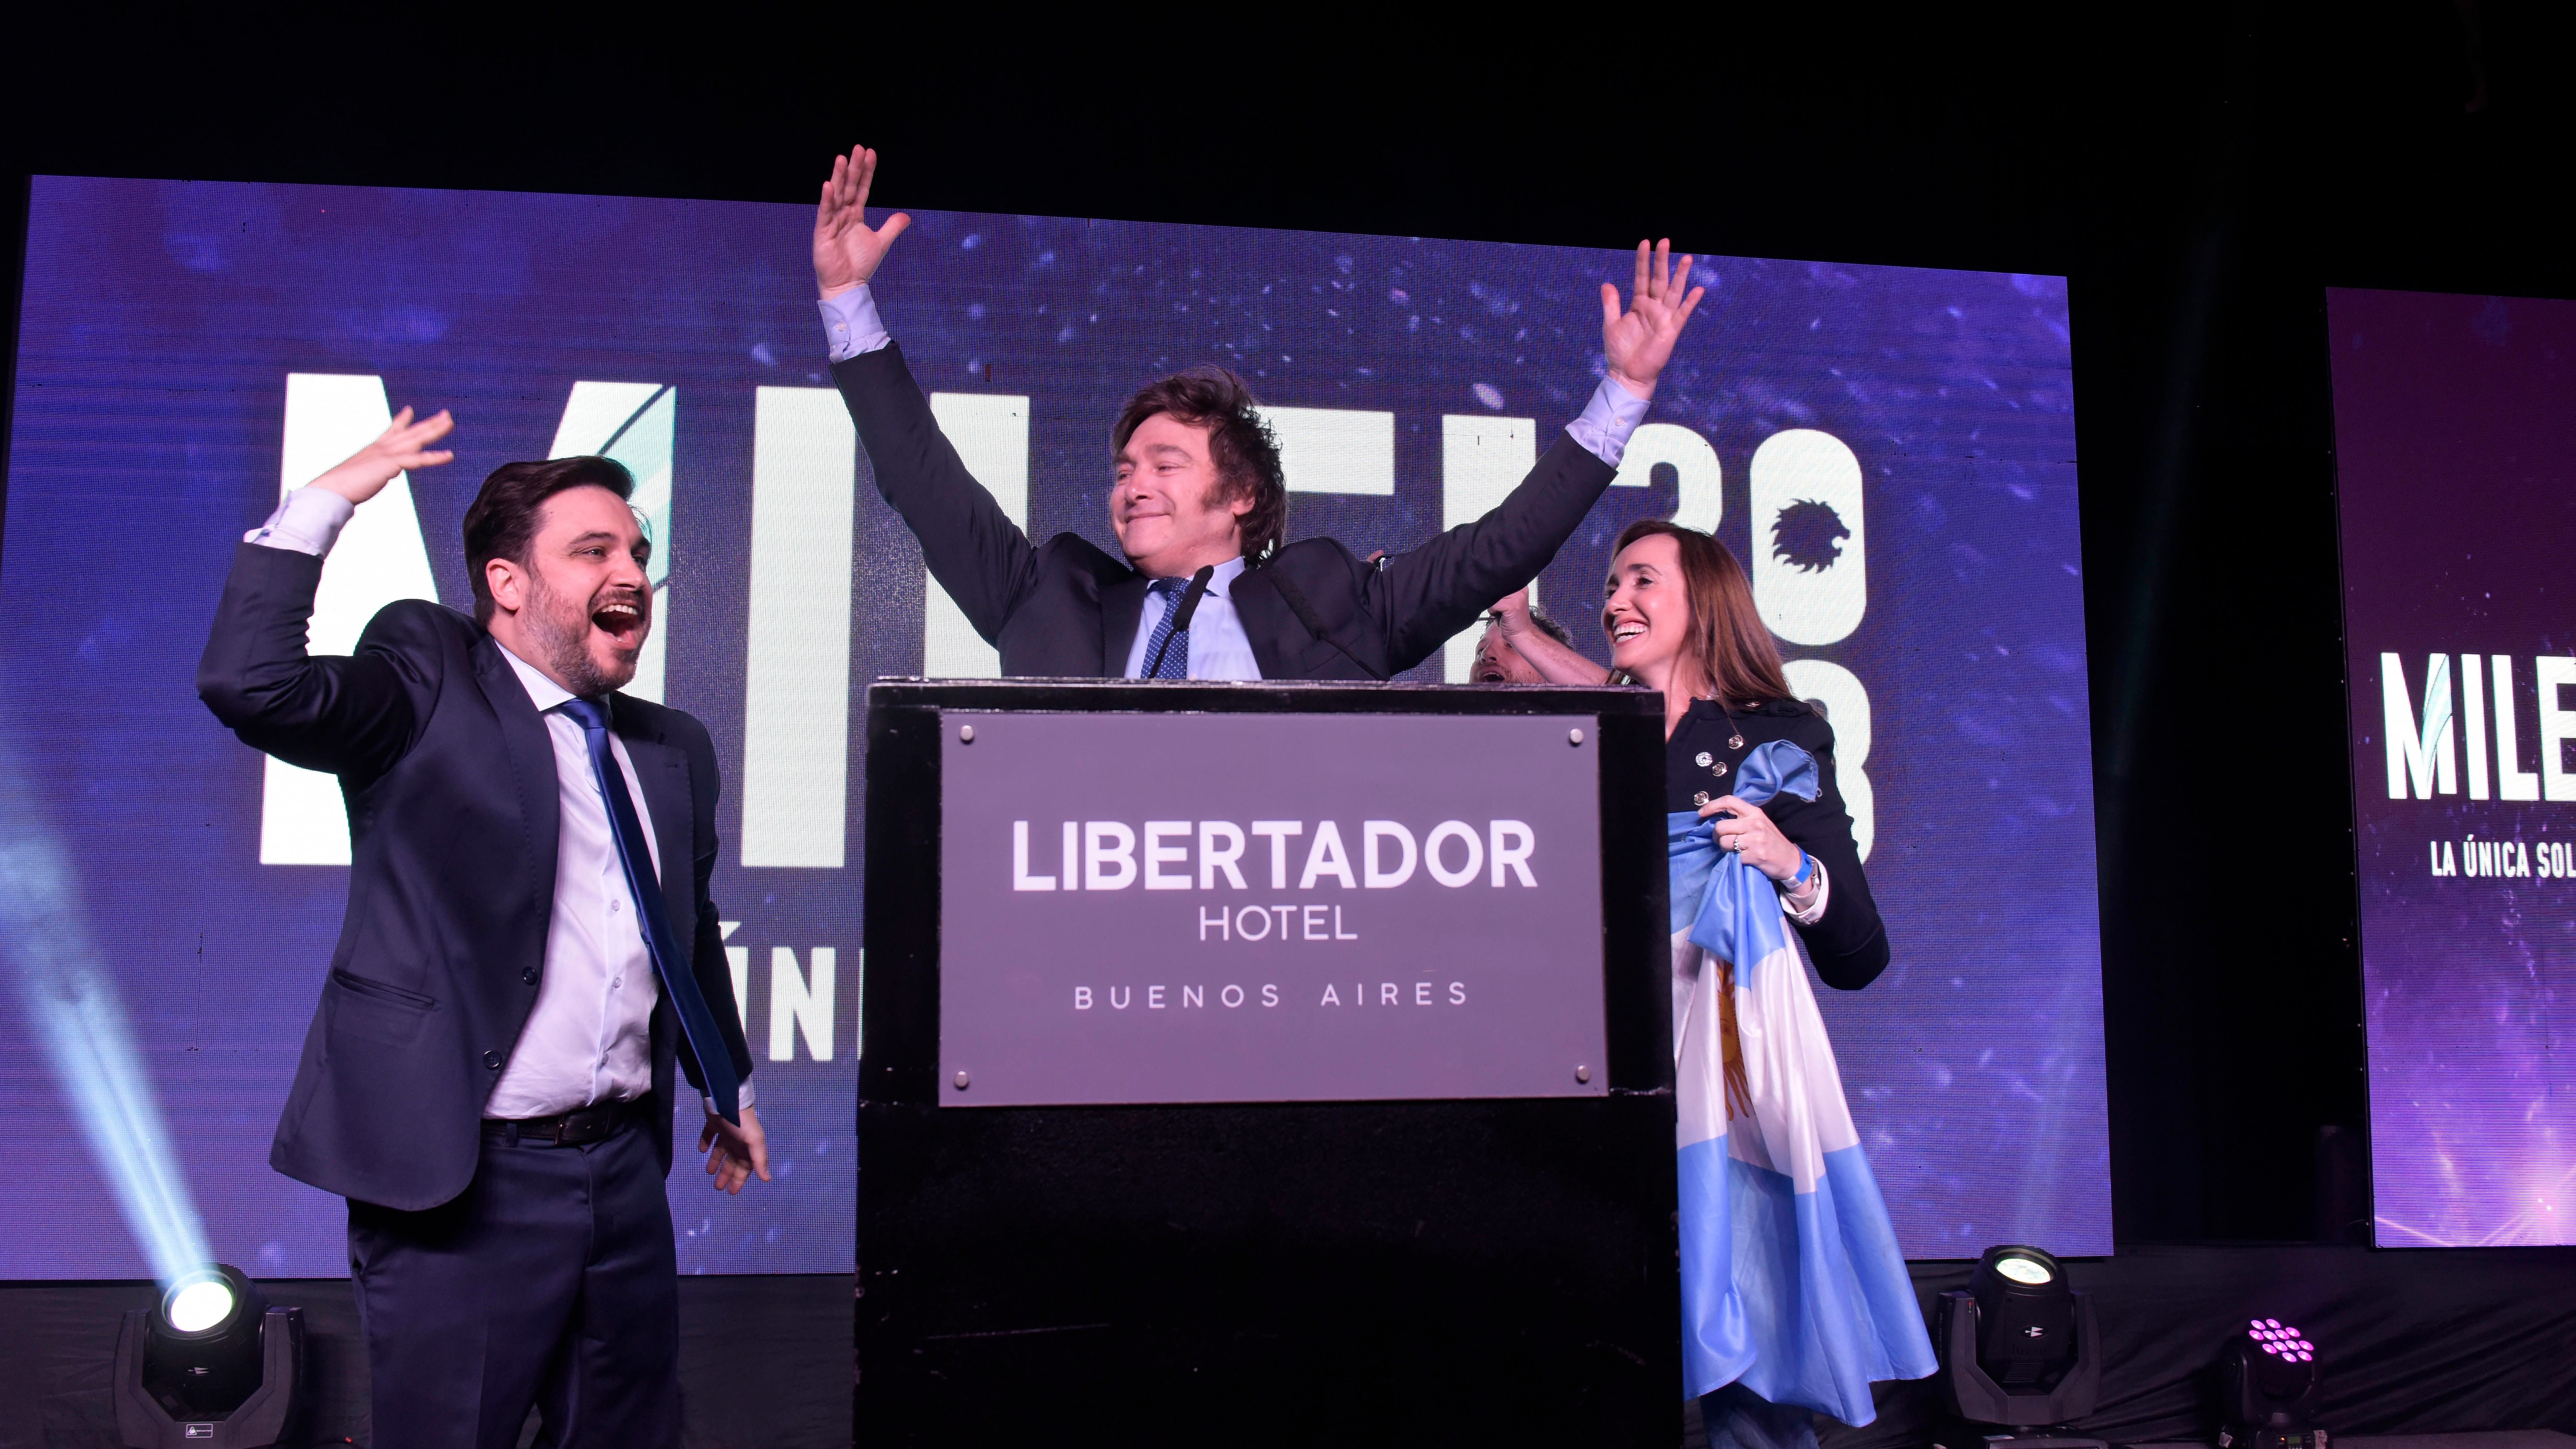 Javier Milei celebrated and maintained his very tough speech at the start of the new stage of the campaign